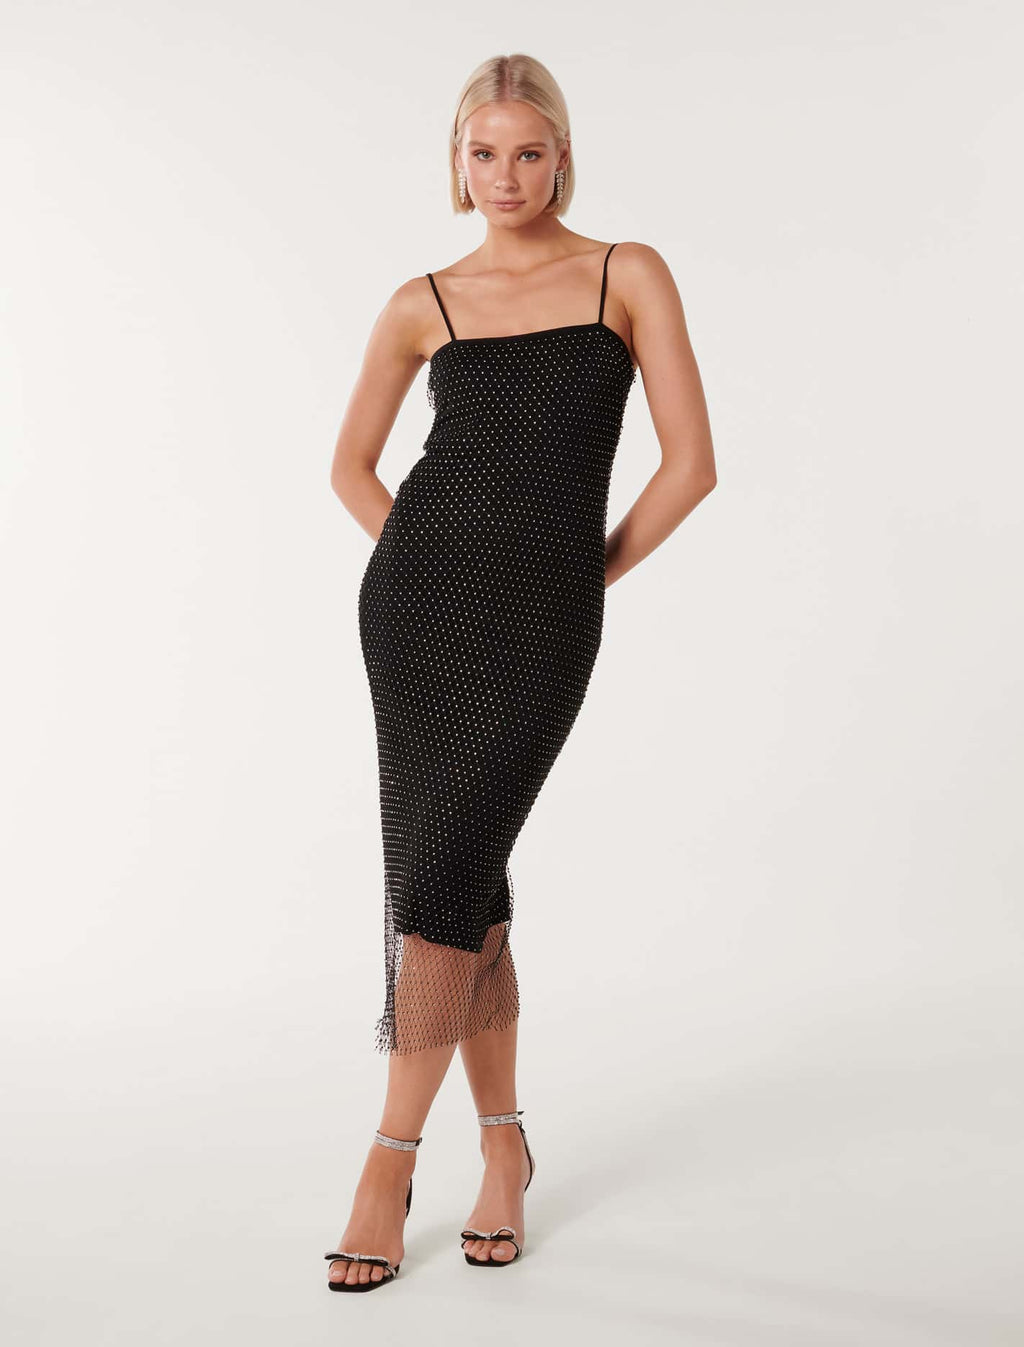 Topshop Tall Bodycon Dress With Skinny Straps And Lace Overlay 93